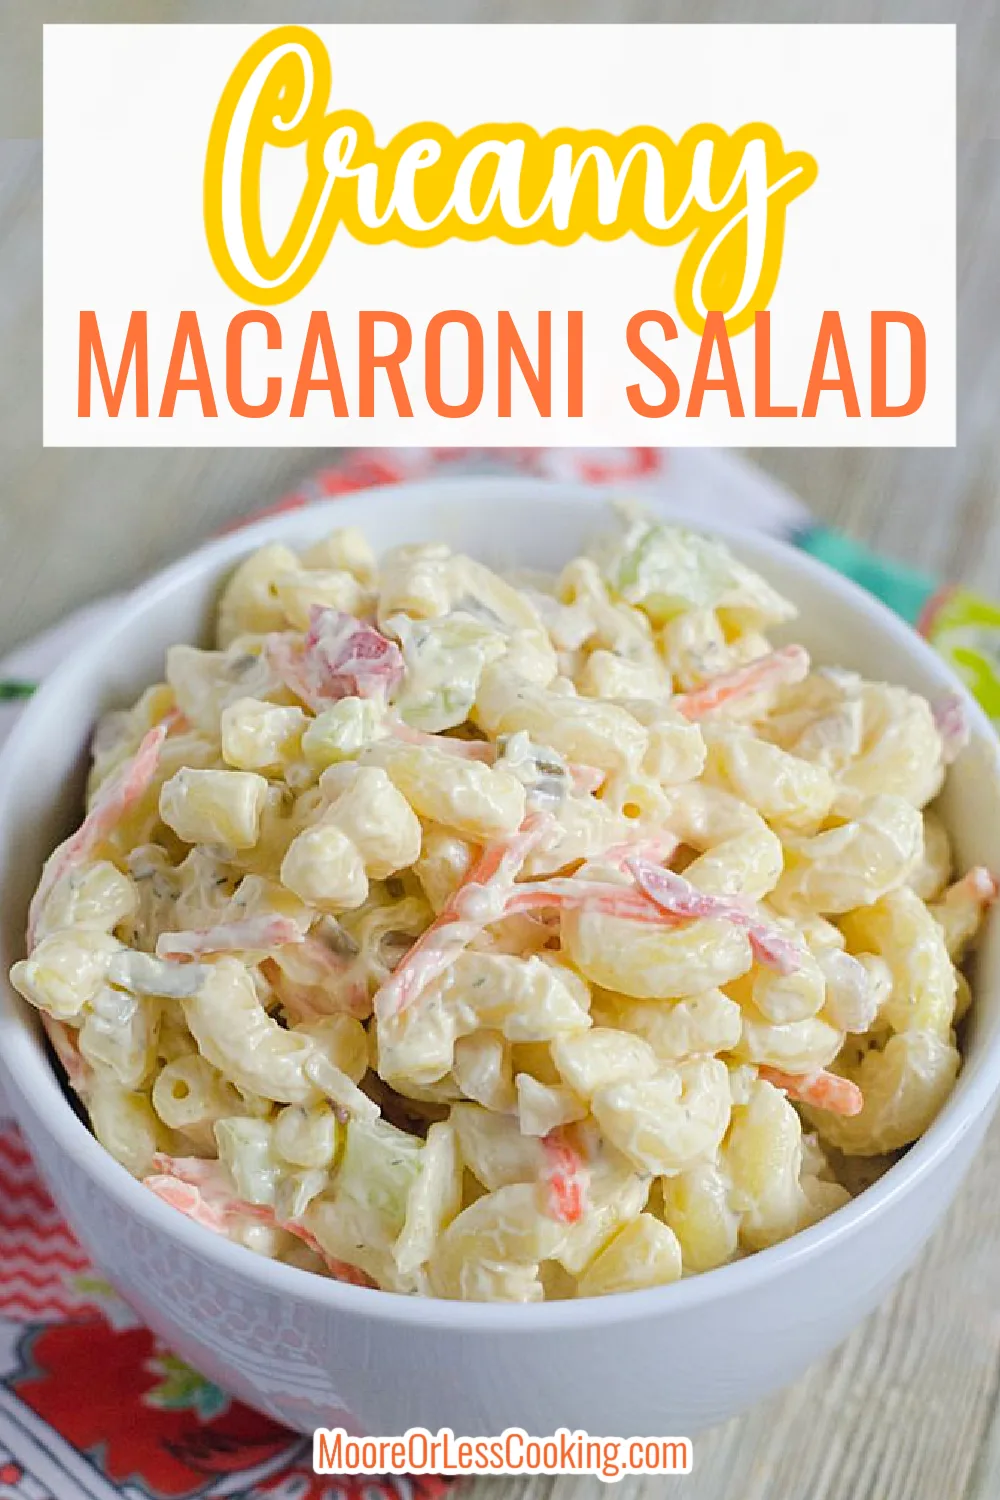 No summer potluck, BBQ, or picnic would be complete without this classic Creamy Macaroni Salad. This easy macaroni salad is packed with finely diced veggies and tossed with an irresistible tangy homemade dressing, making it a flavorful dish that's always a crowd-pleaser. via @Mooreorlesscook